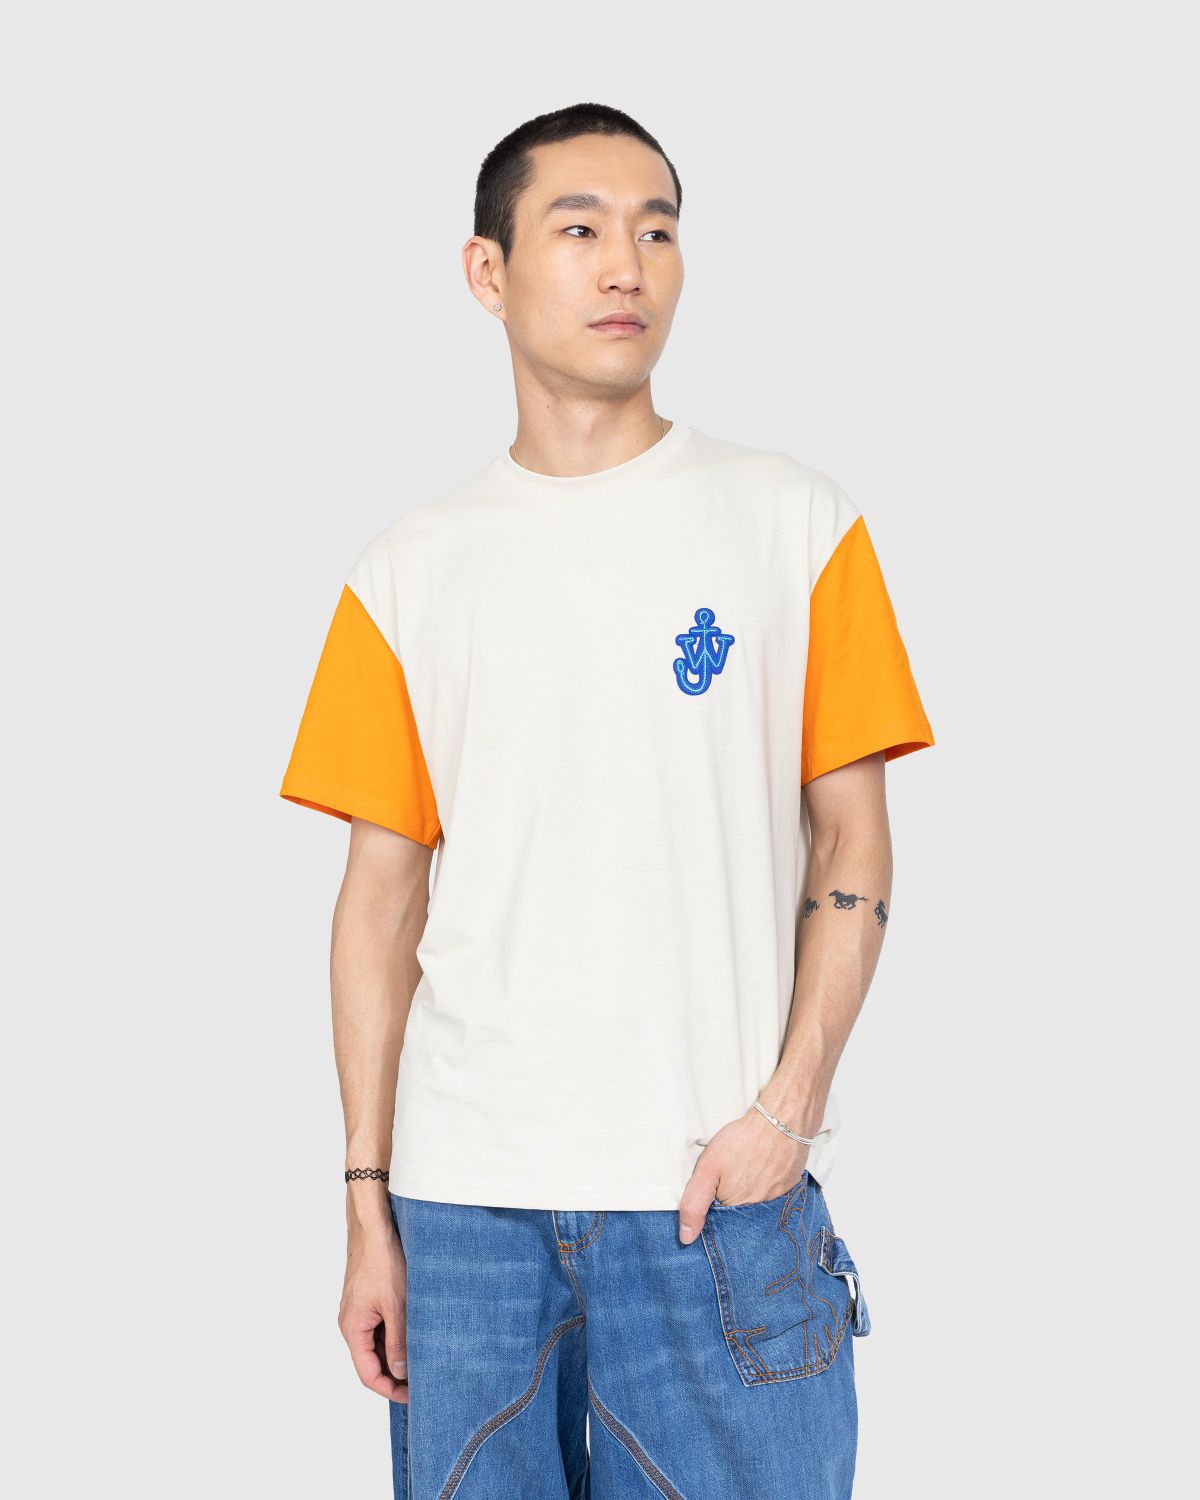 J.W. Anderson – Anchor Patch Contrast Sleeve T-Shirt - T-shirts - Orange - Image 2